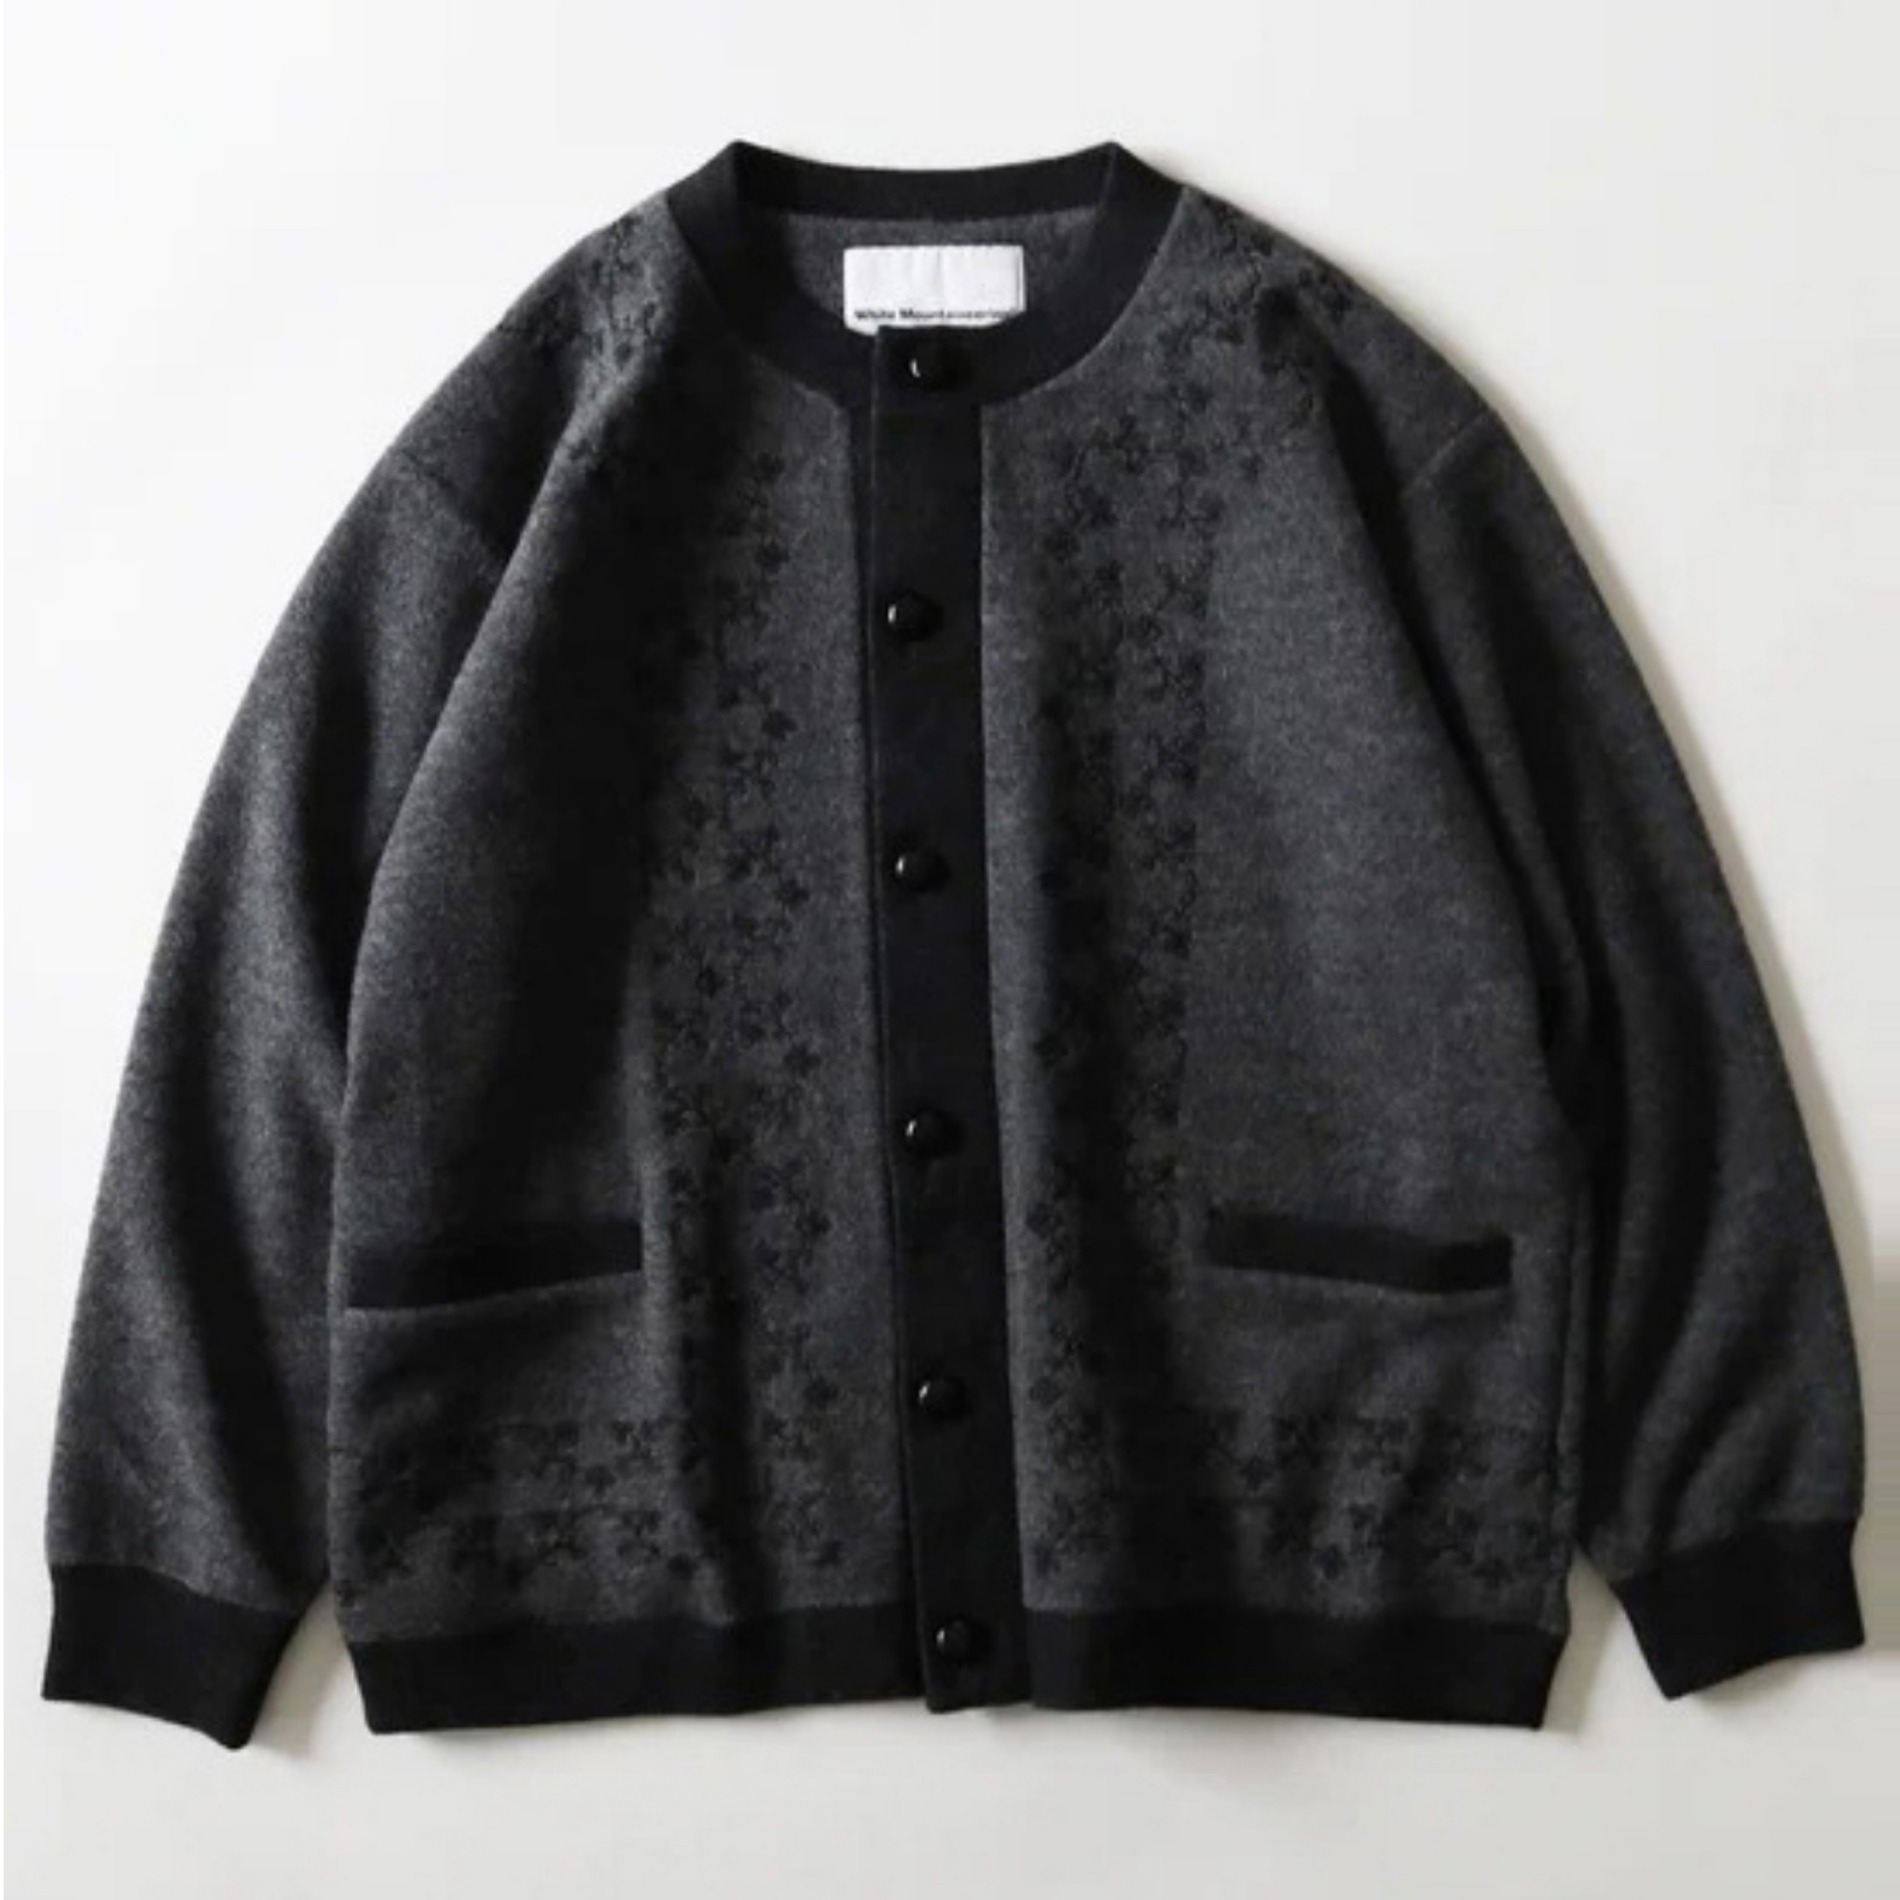 WHITE MOUNTAINEERING EMBROIDERY CARDIGAN CHARCOAL